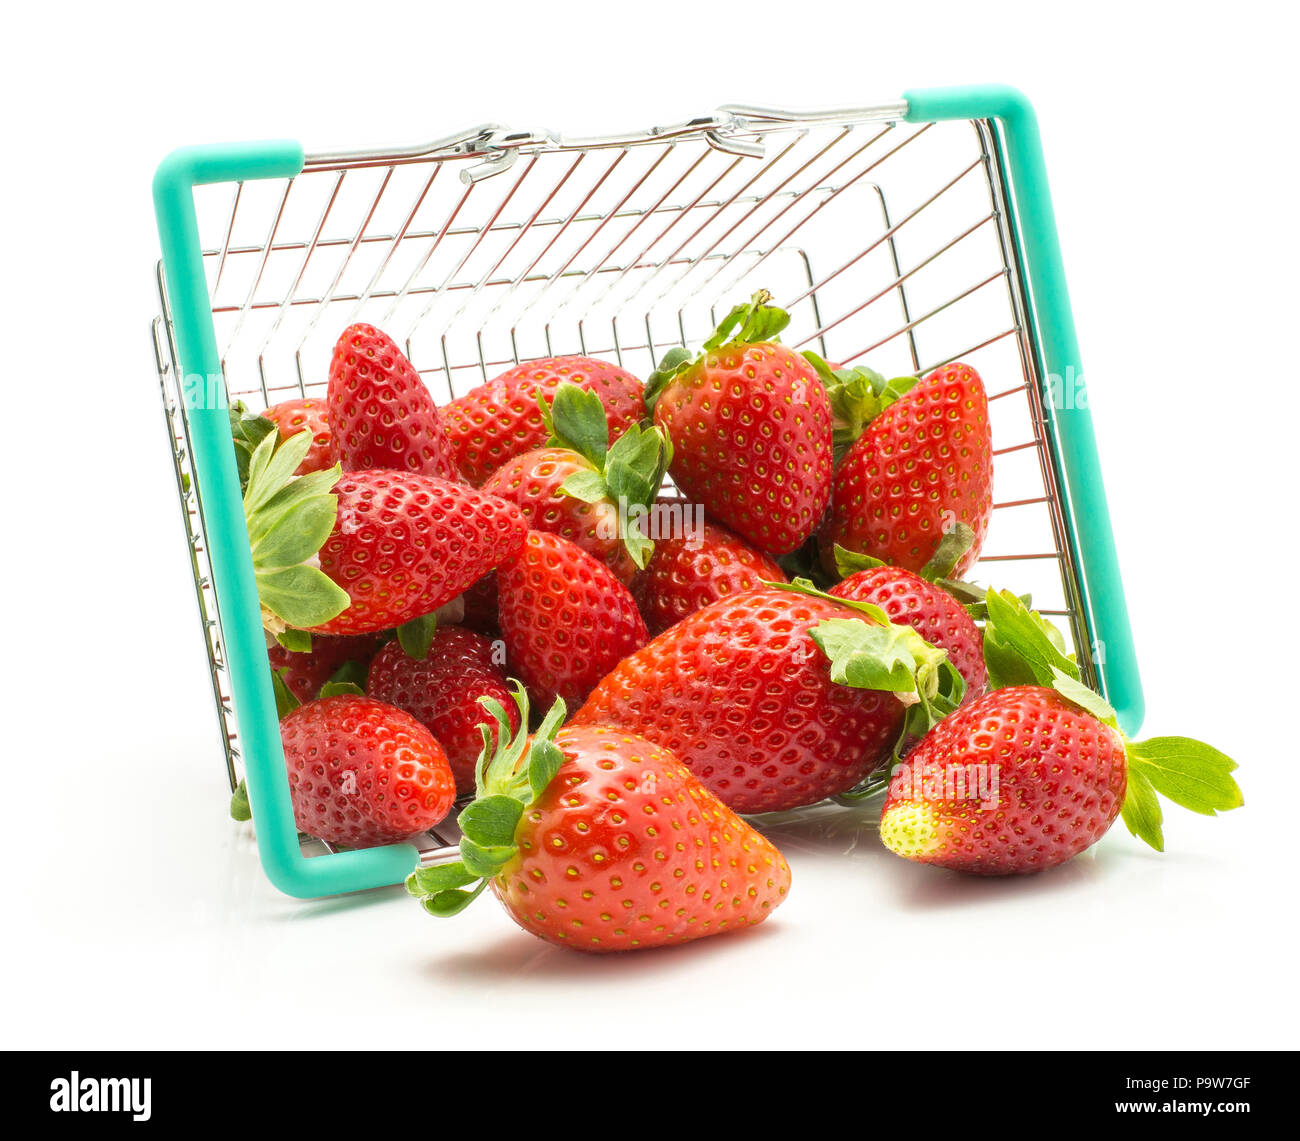 Garden strawberries out a shopping basket isolated on white background Stock Photo